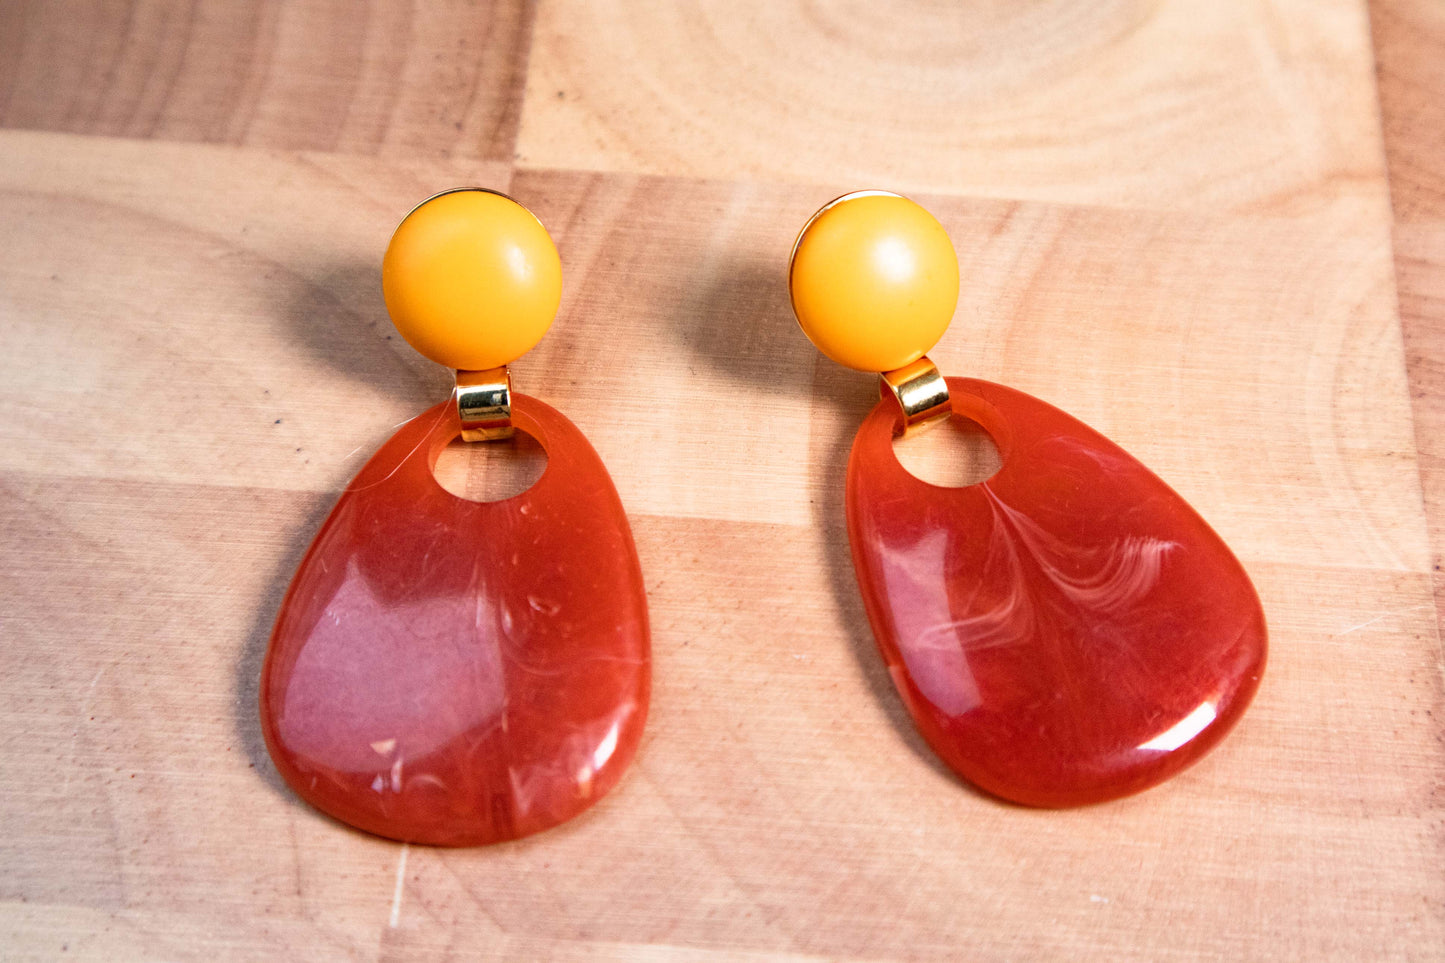 Earrings by FeSendra | Resine + cabochon + Gold-plated brass 24k | terracotta and yellow